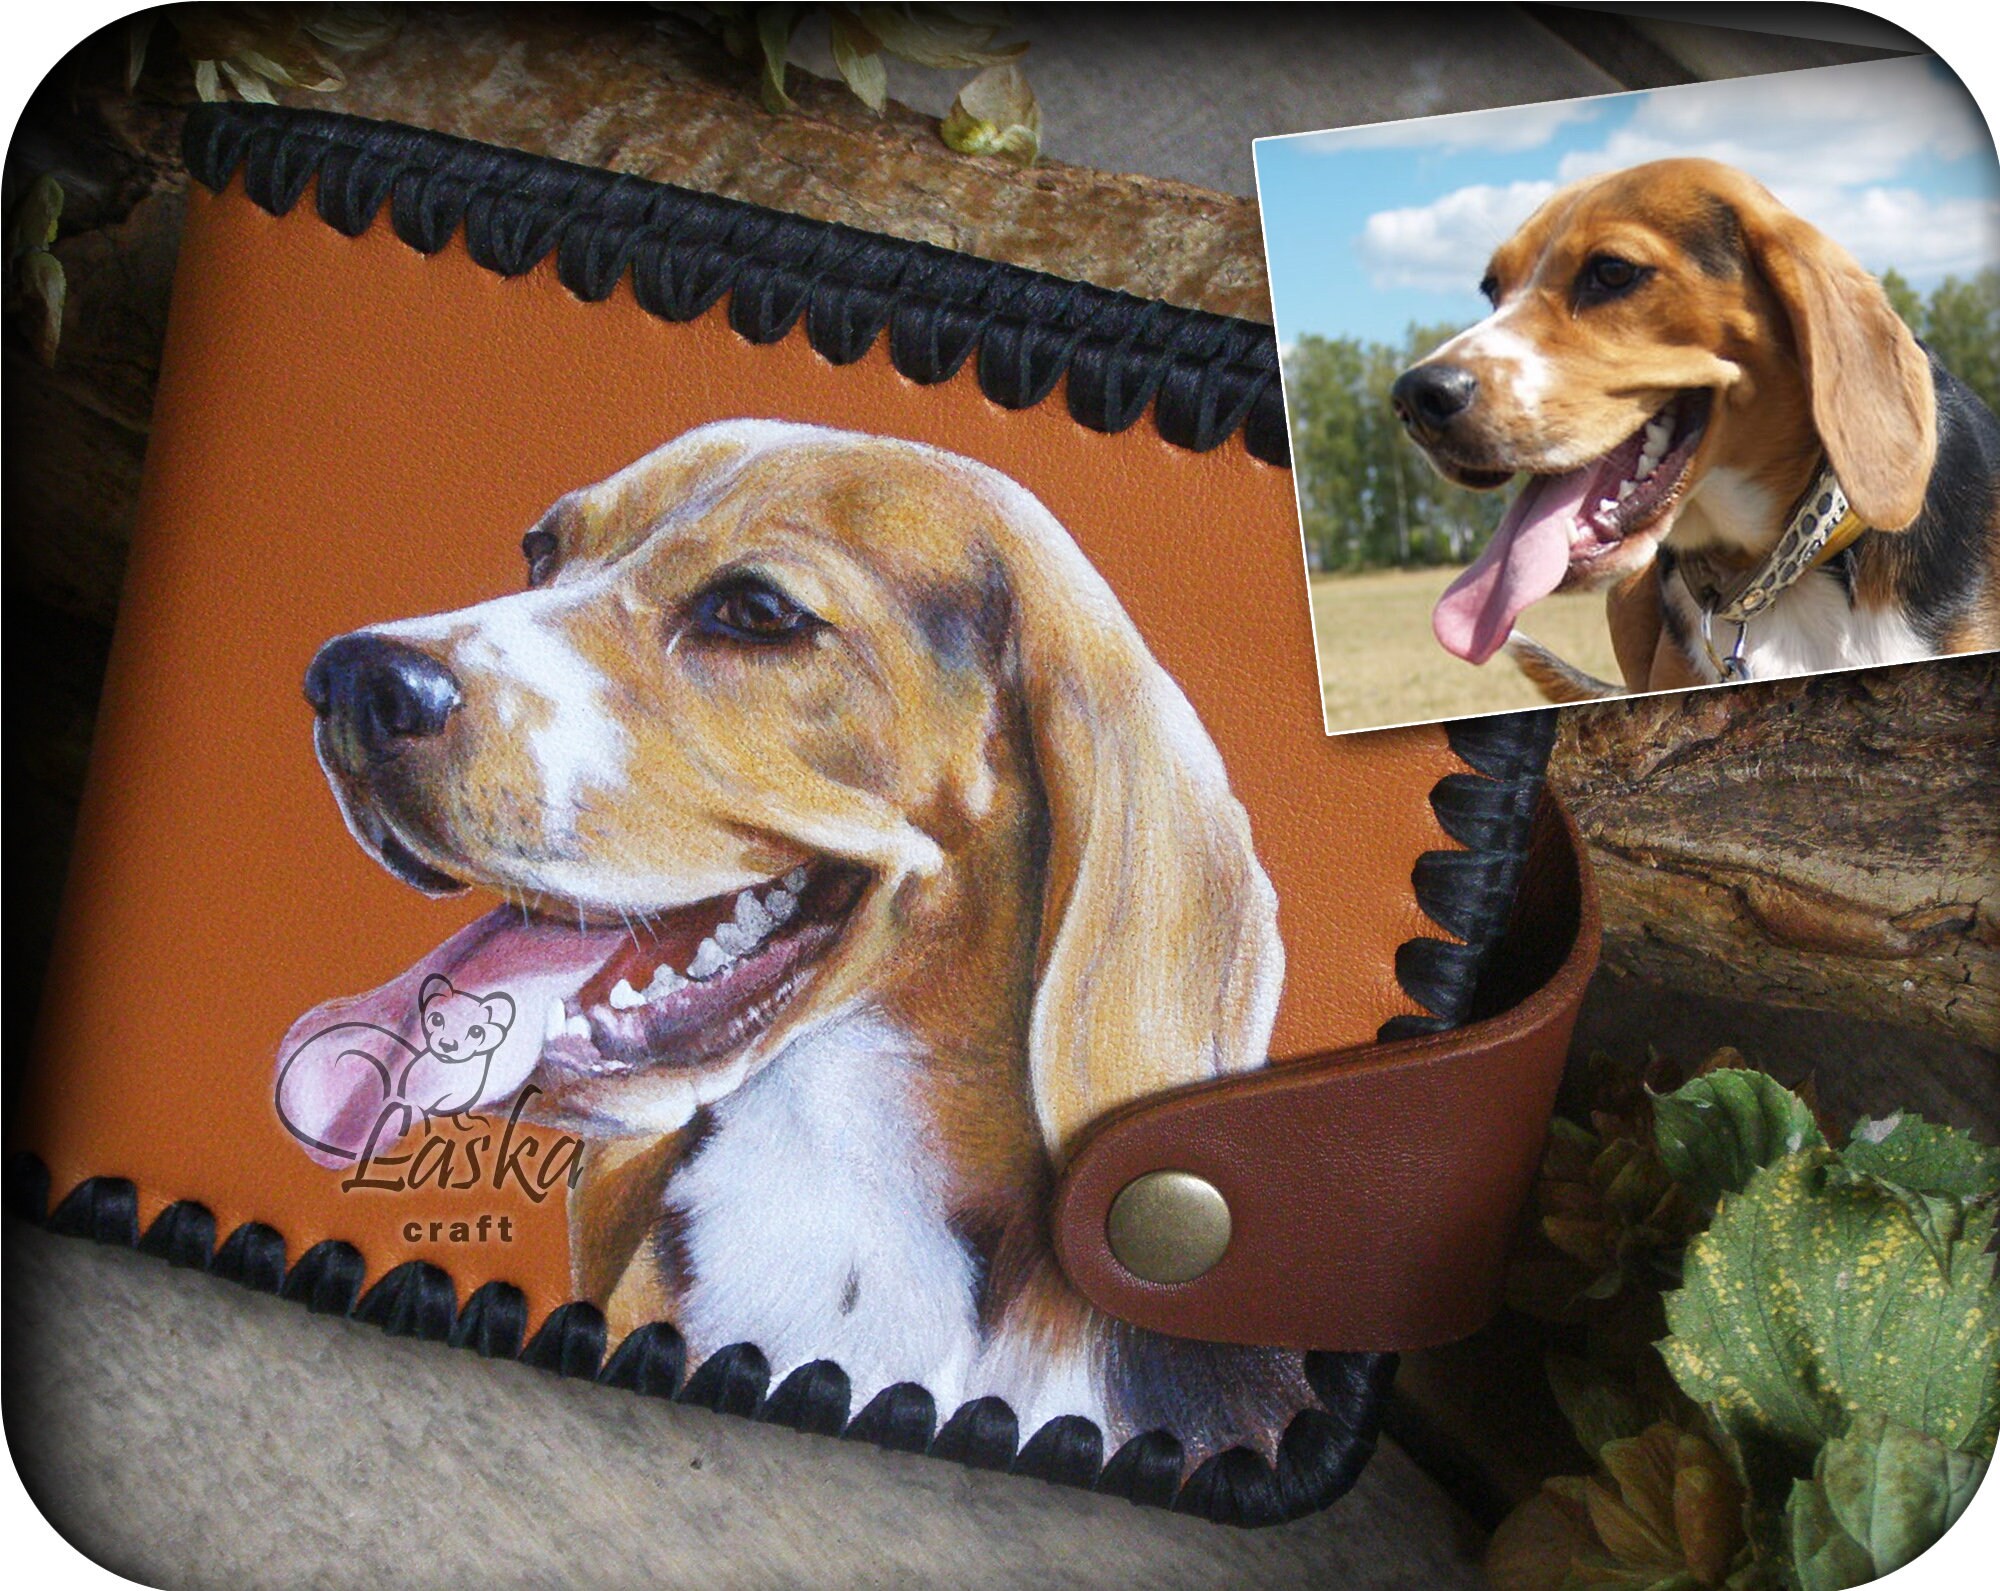 Adorable Beagle puppy curiously looking into an open wallet, symbolizing the cost of pet ownership